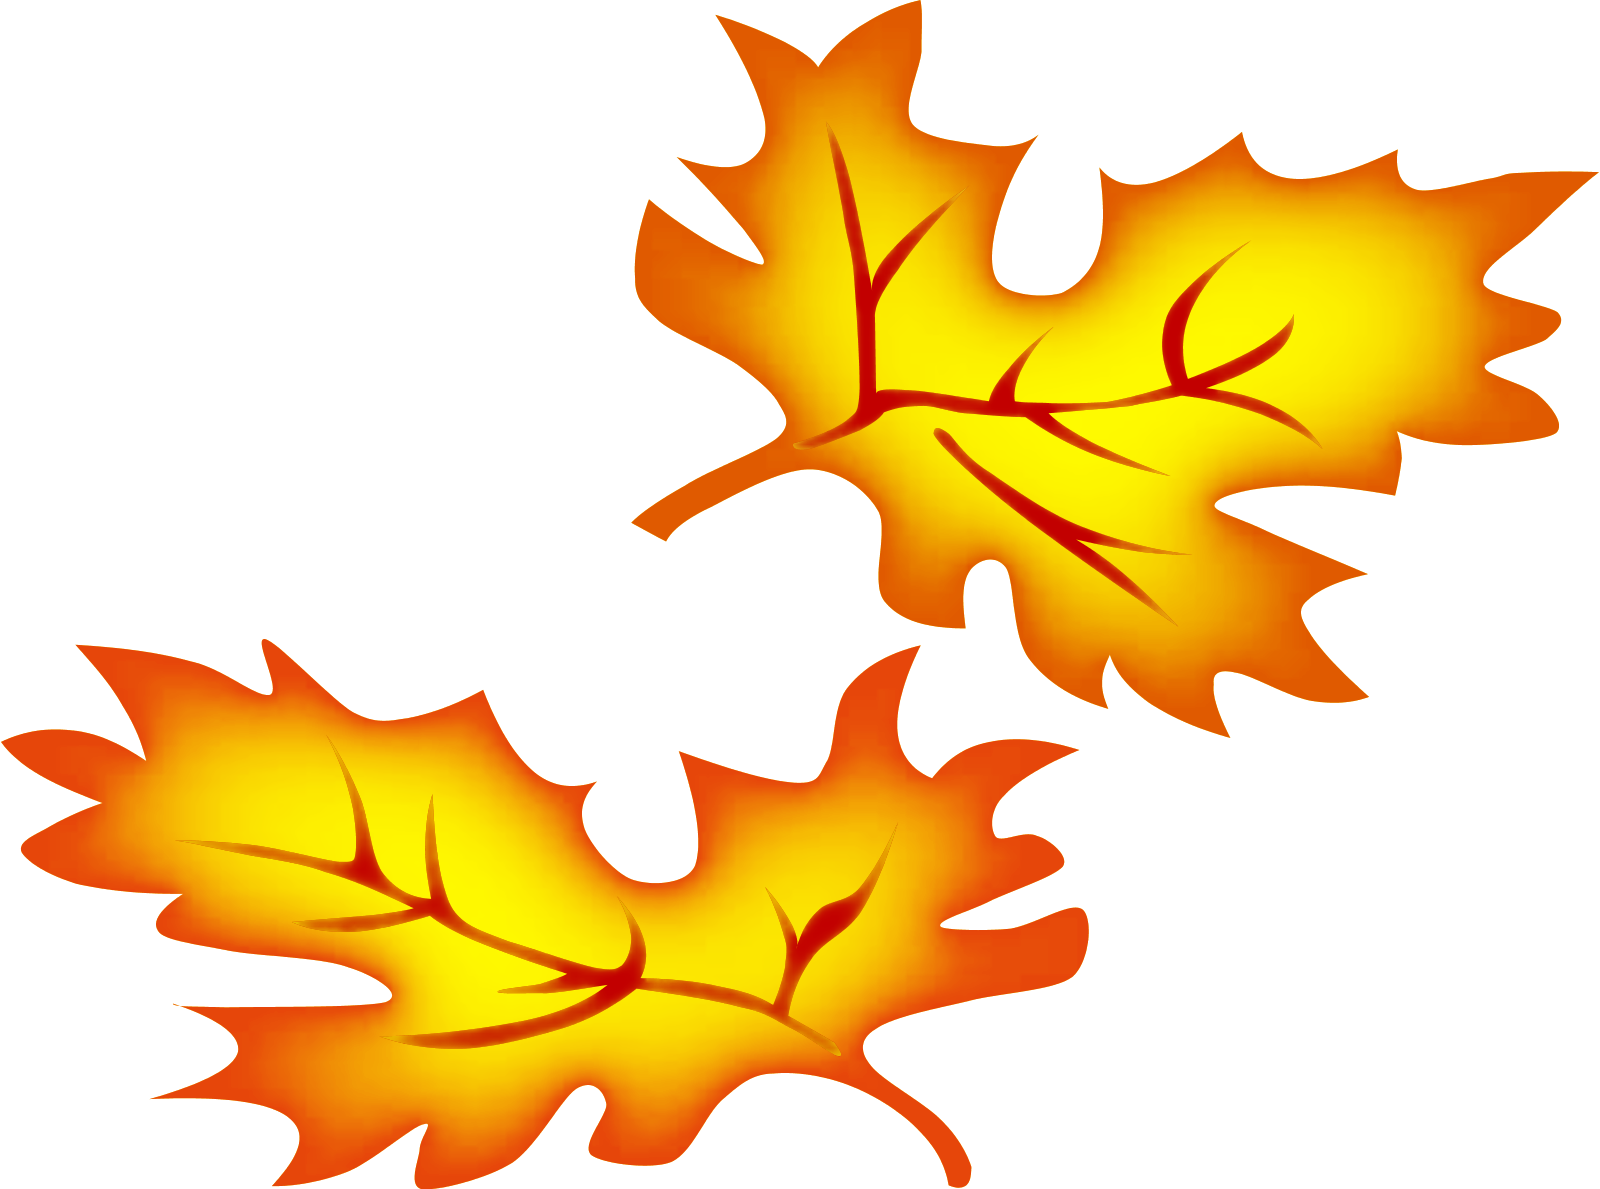 Fall Leaves Clipart   Clipart Panda   Free Clipart Images